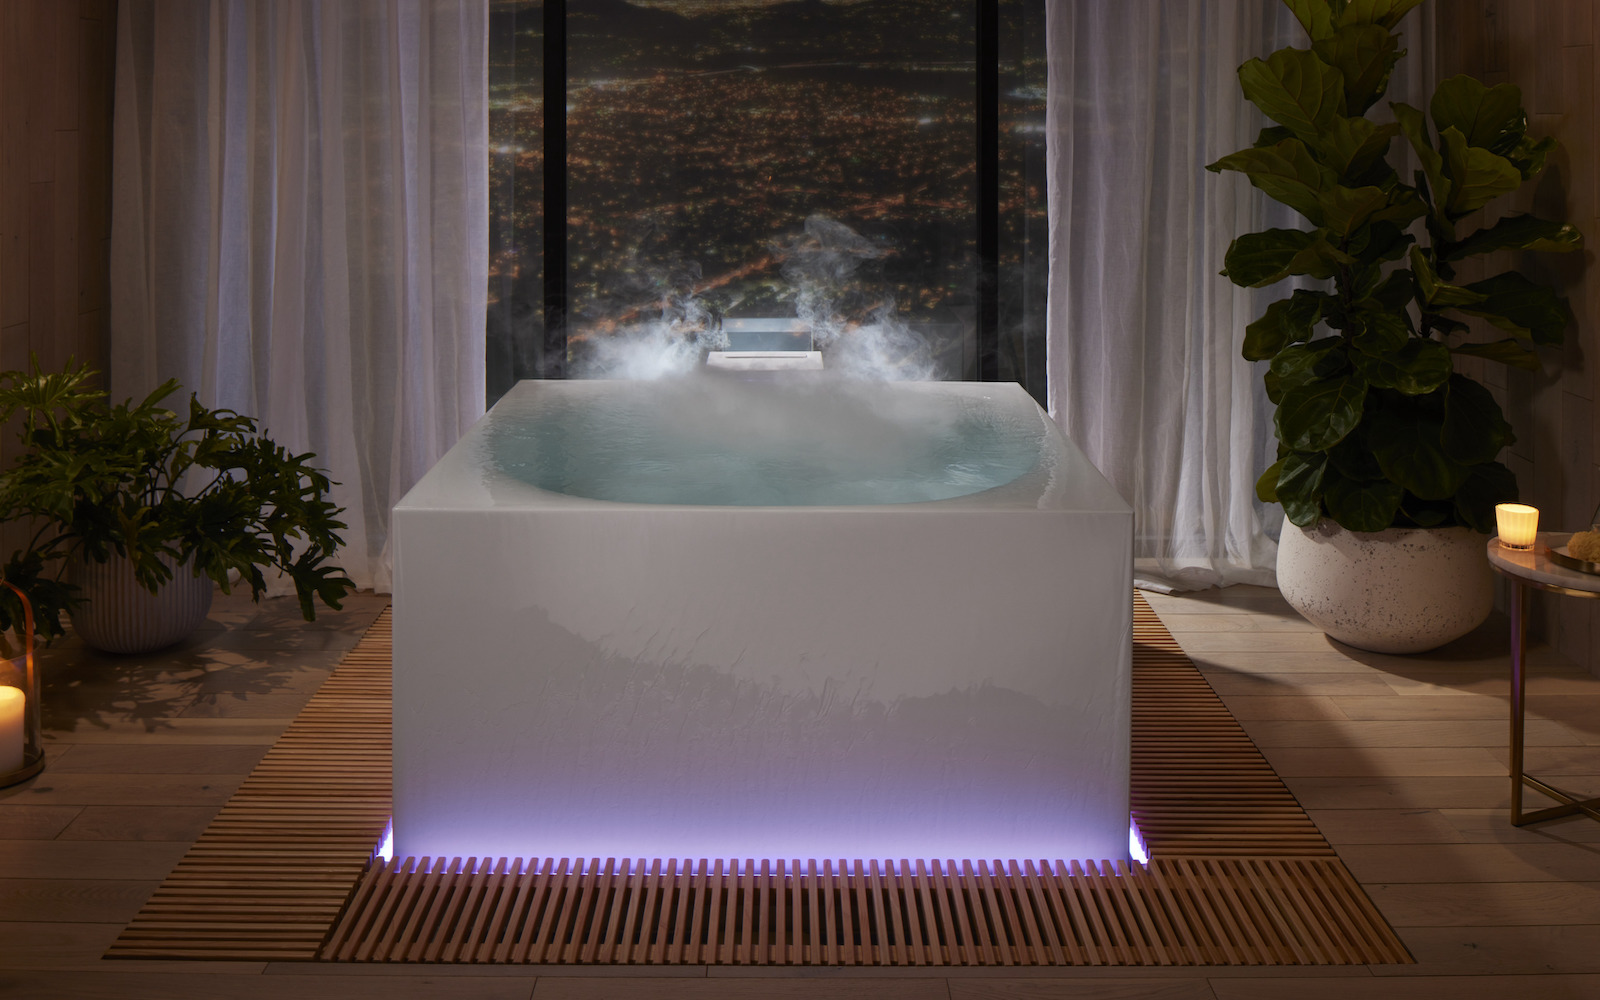 Kohler stillness bath with steam coming out of it